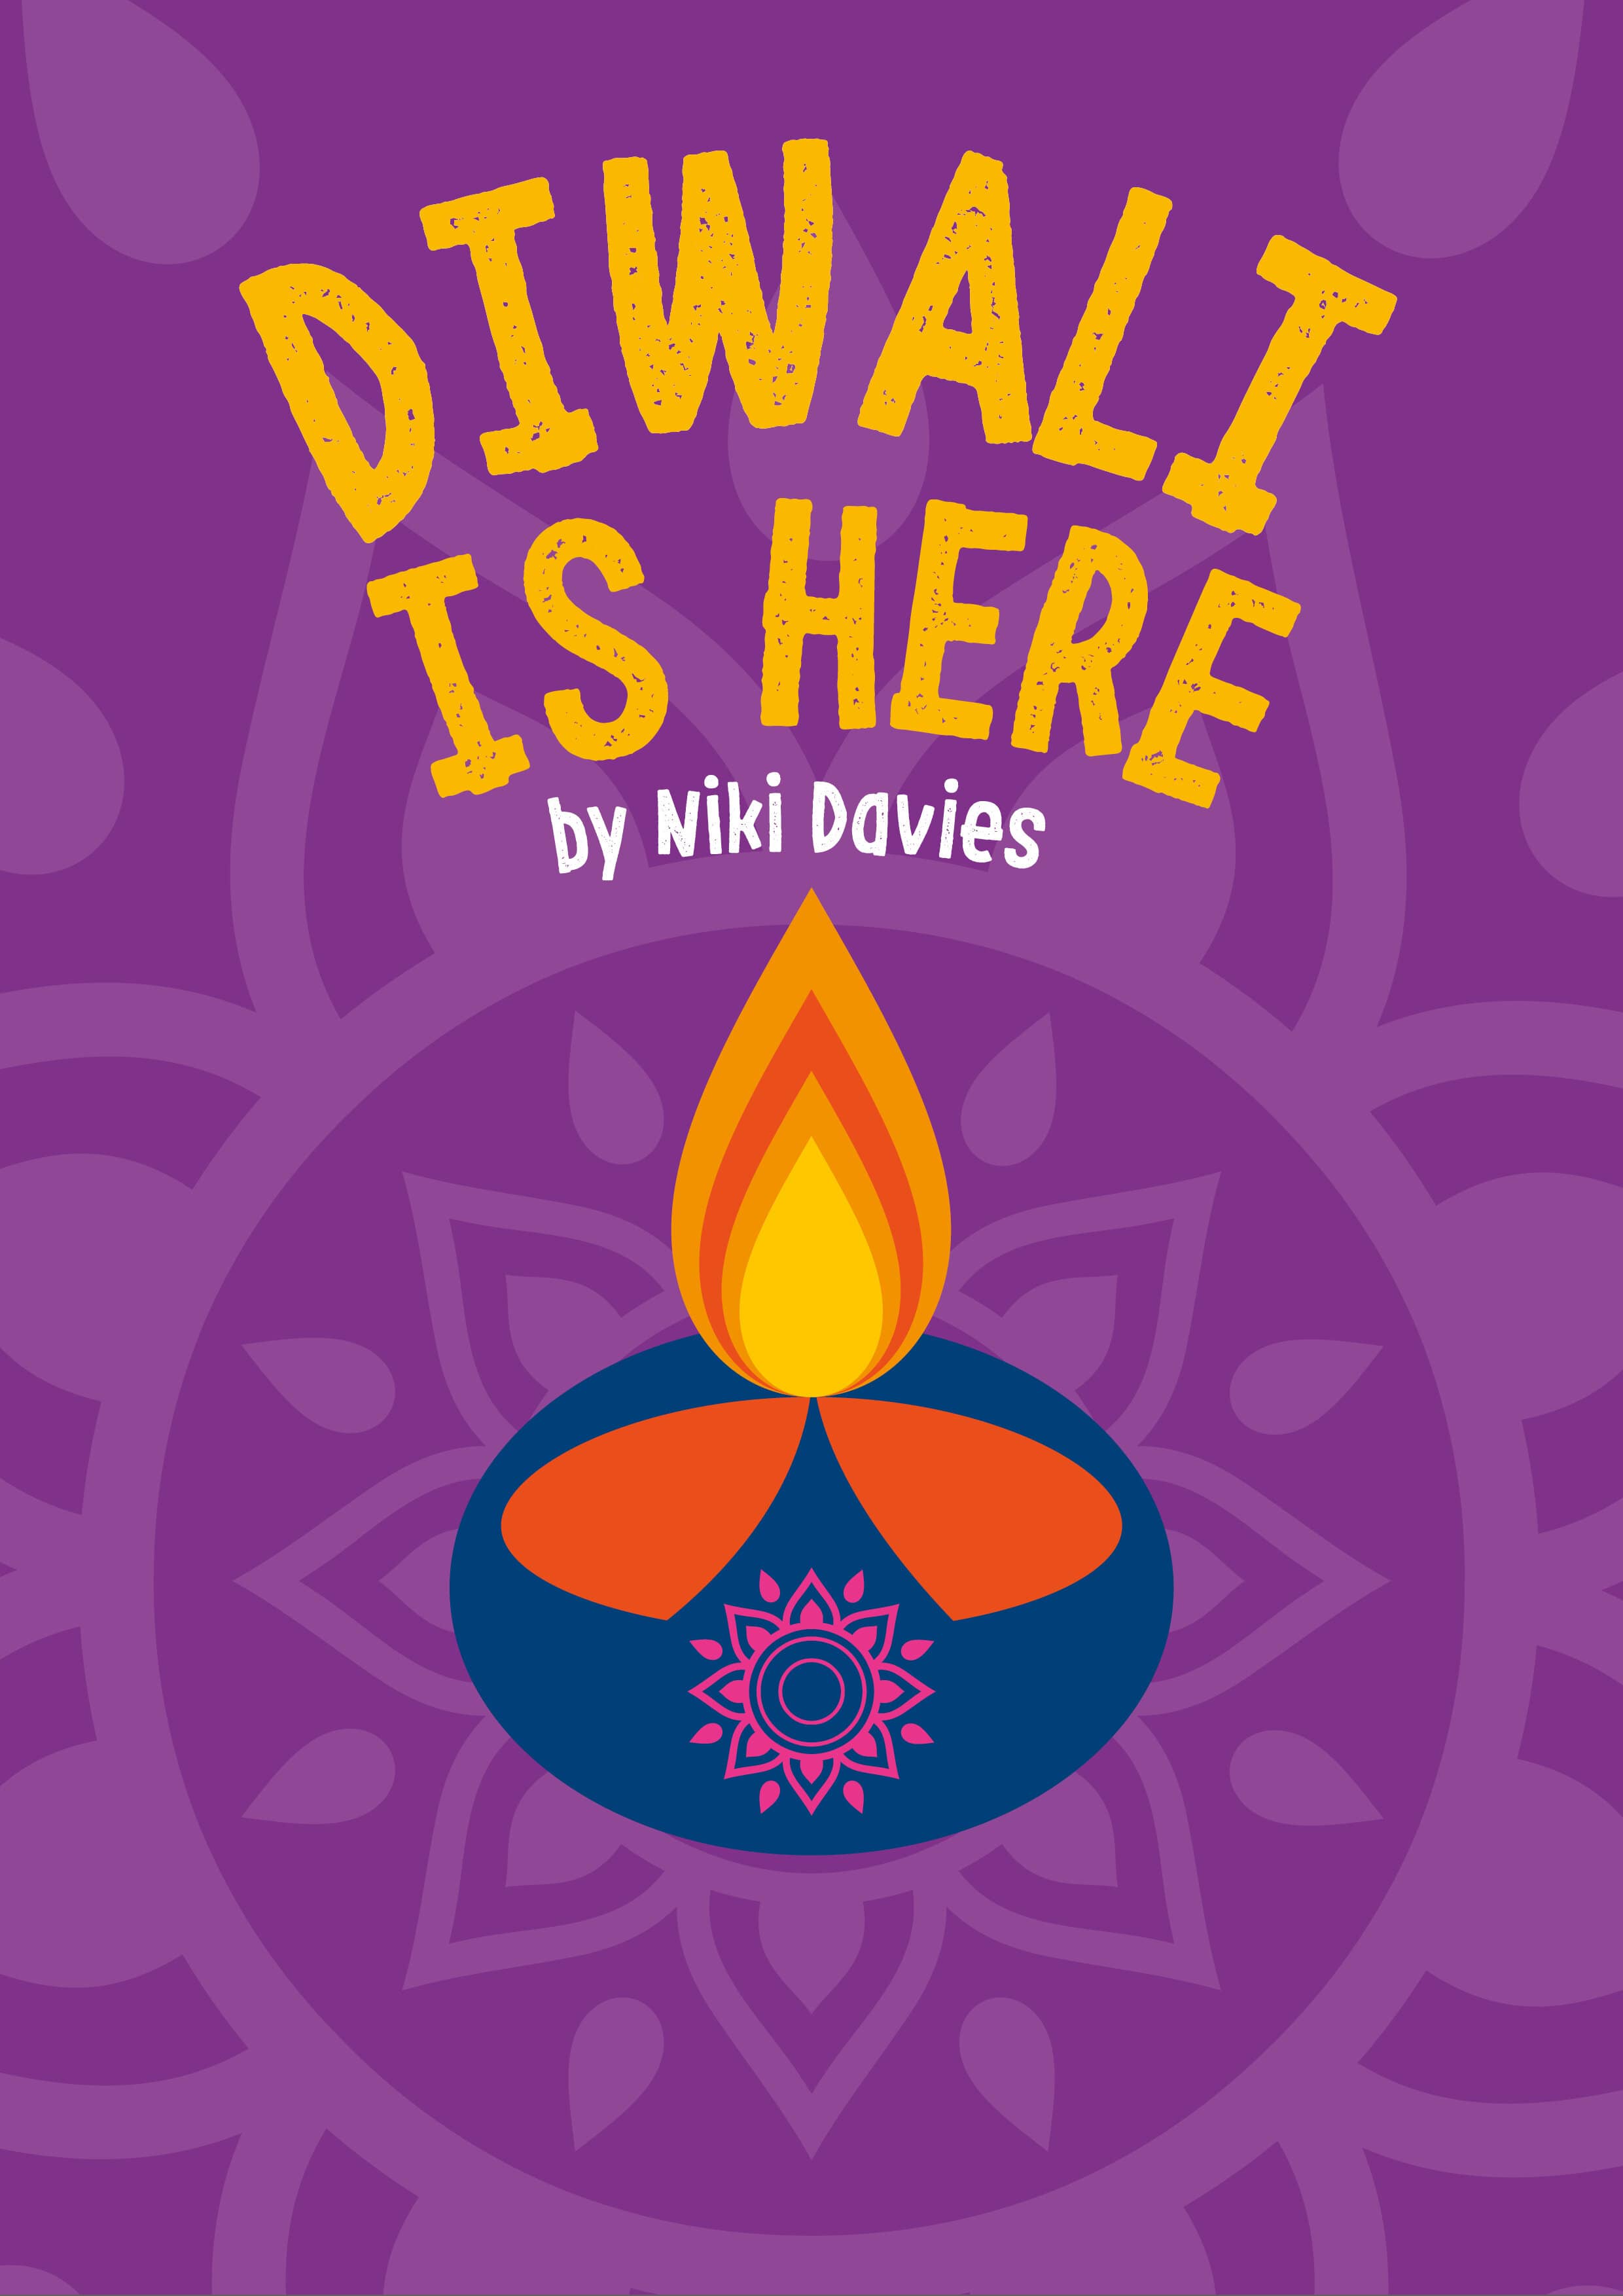 DIWALI IS HERE DOWNLOAD PACK - 100% discount with code DIWALI100